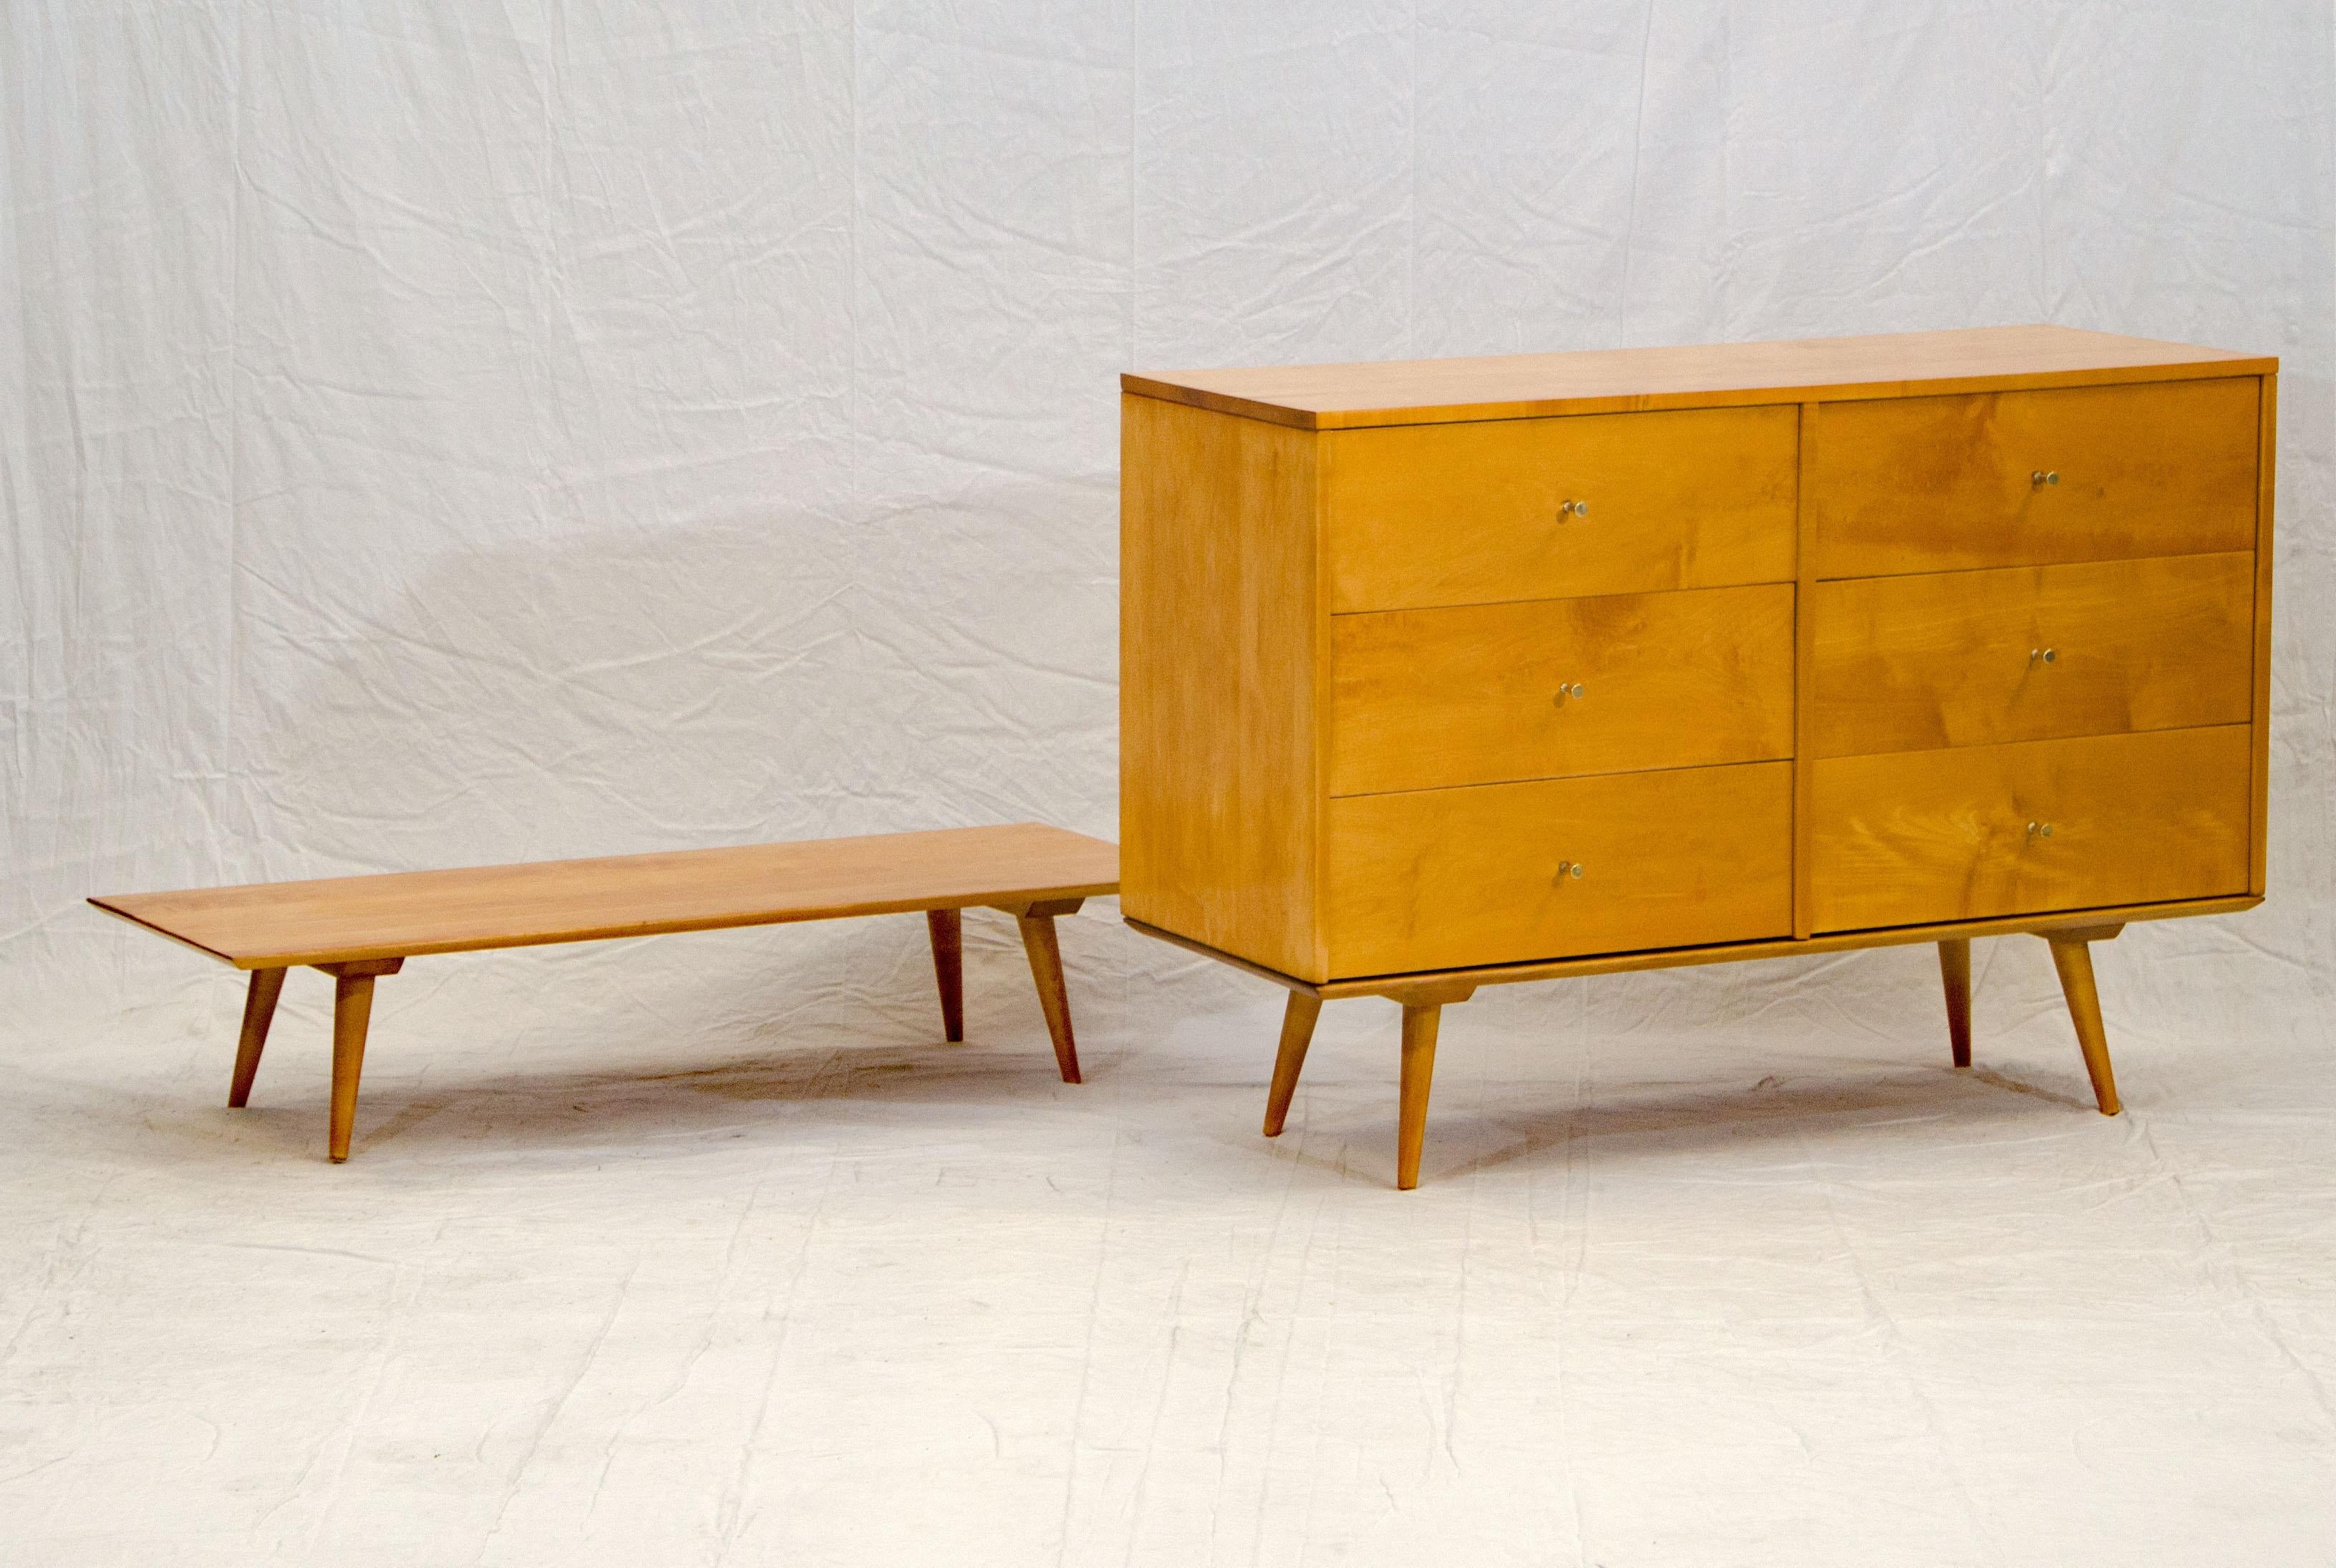 American Pair of Paul McCobb Dressers / Chests on Platforms, Planner Group